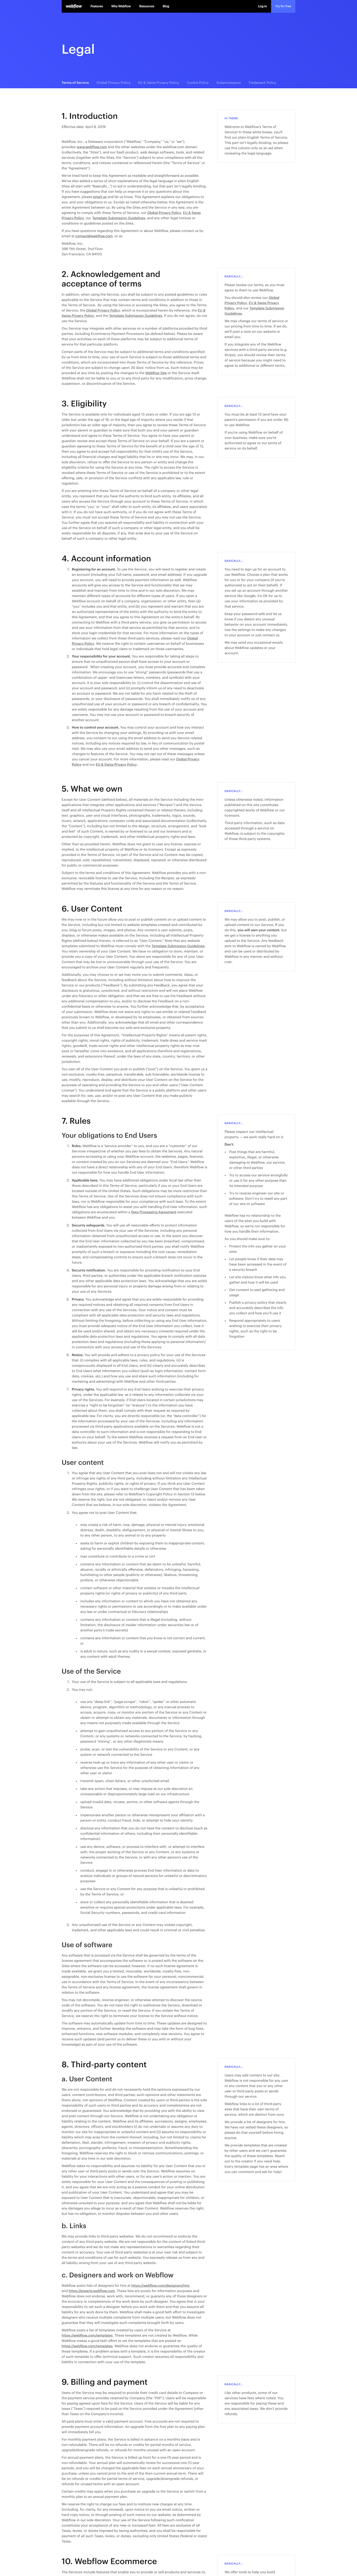 Screenshot of the Terms & Conditions page from the Webflow website.